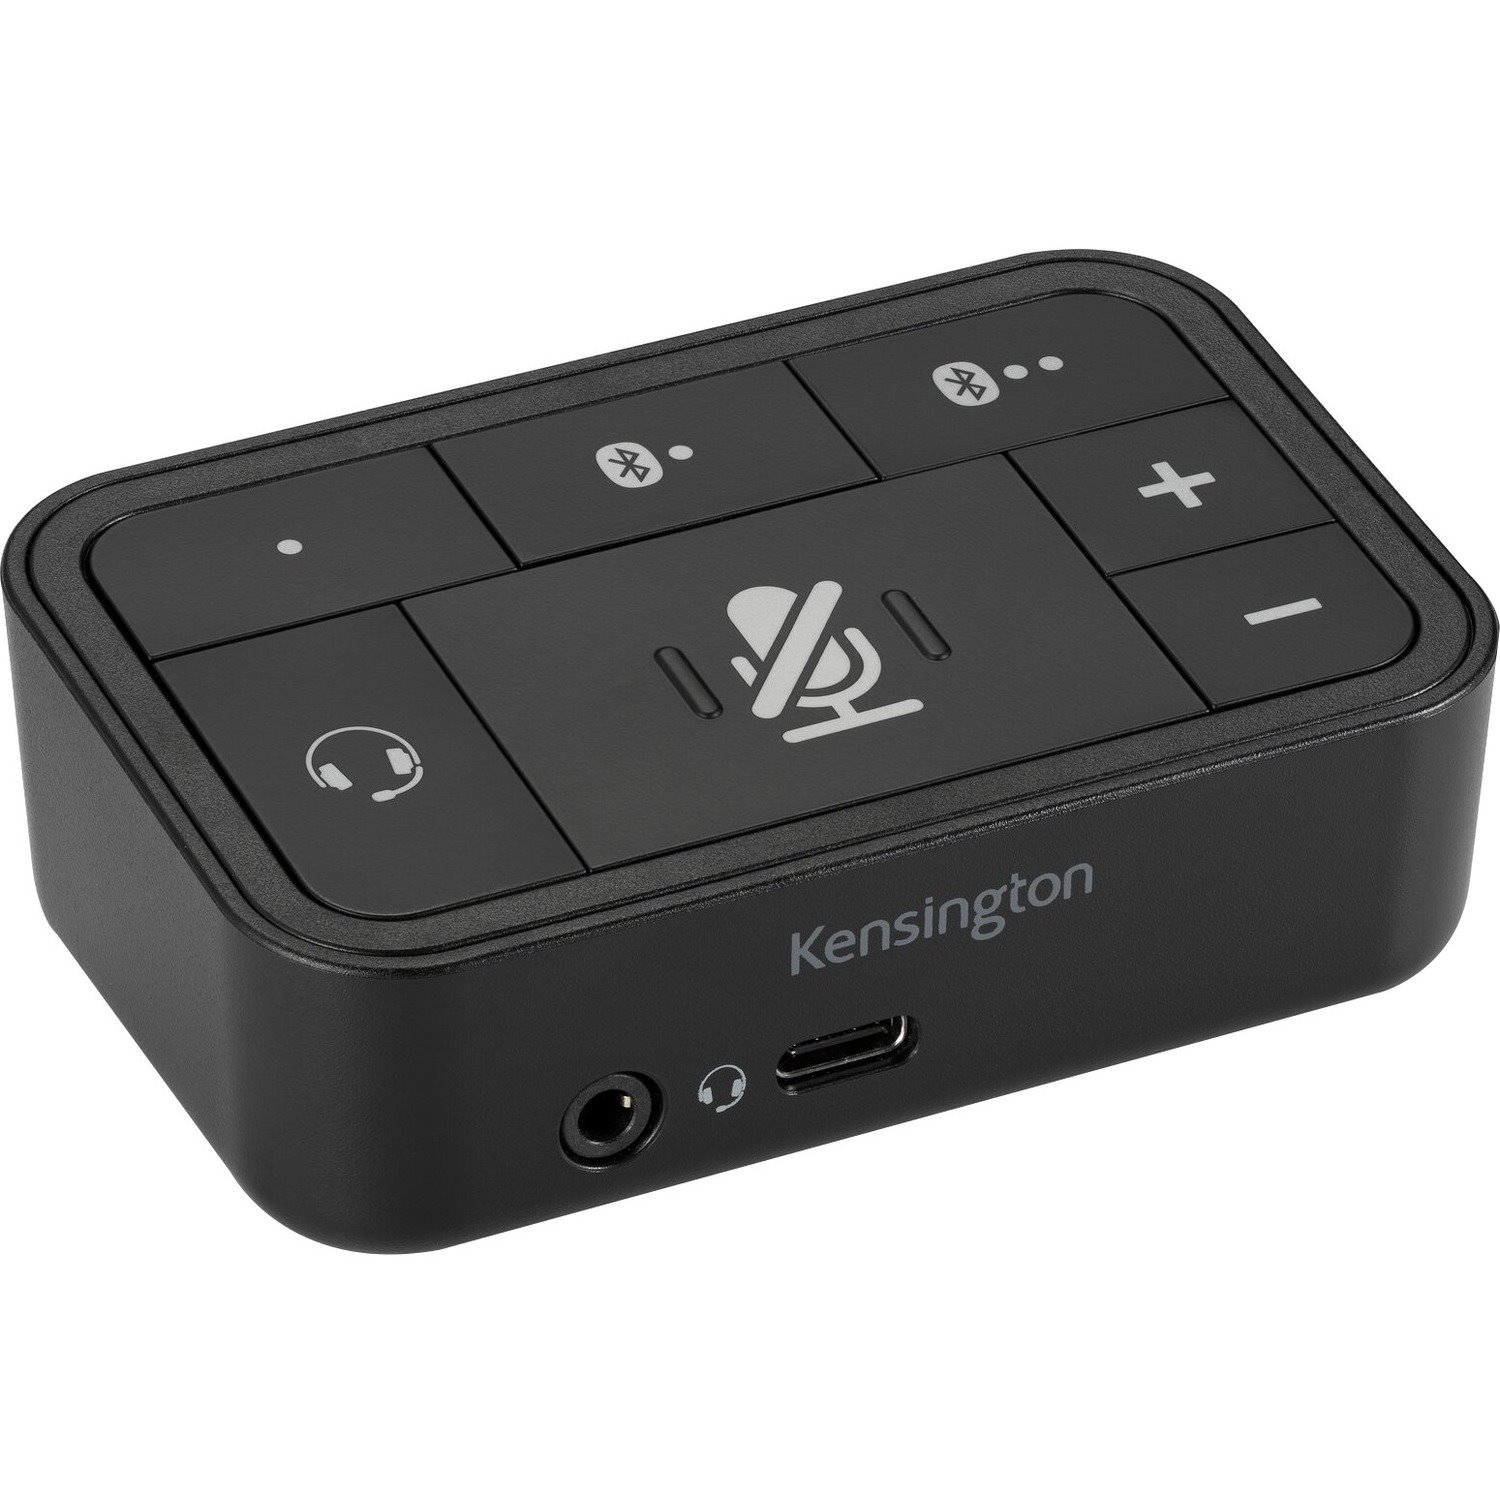 Kensington K83300WW Headset Switch for Headset, Phone, Tablet PC, Notebook